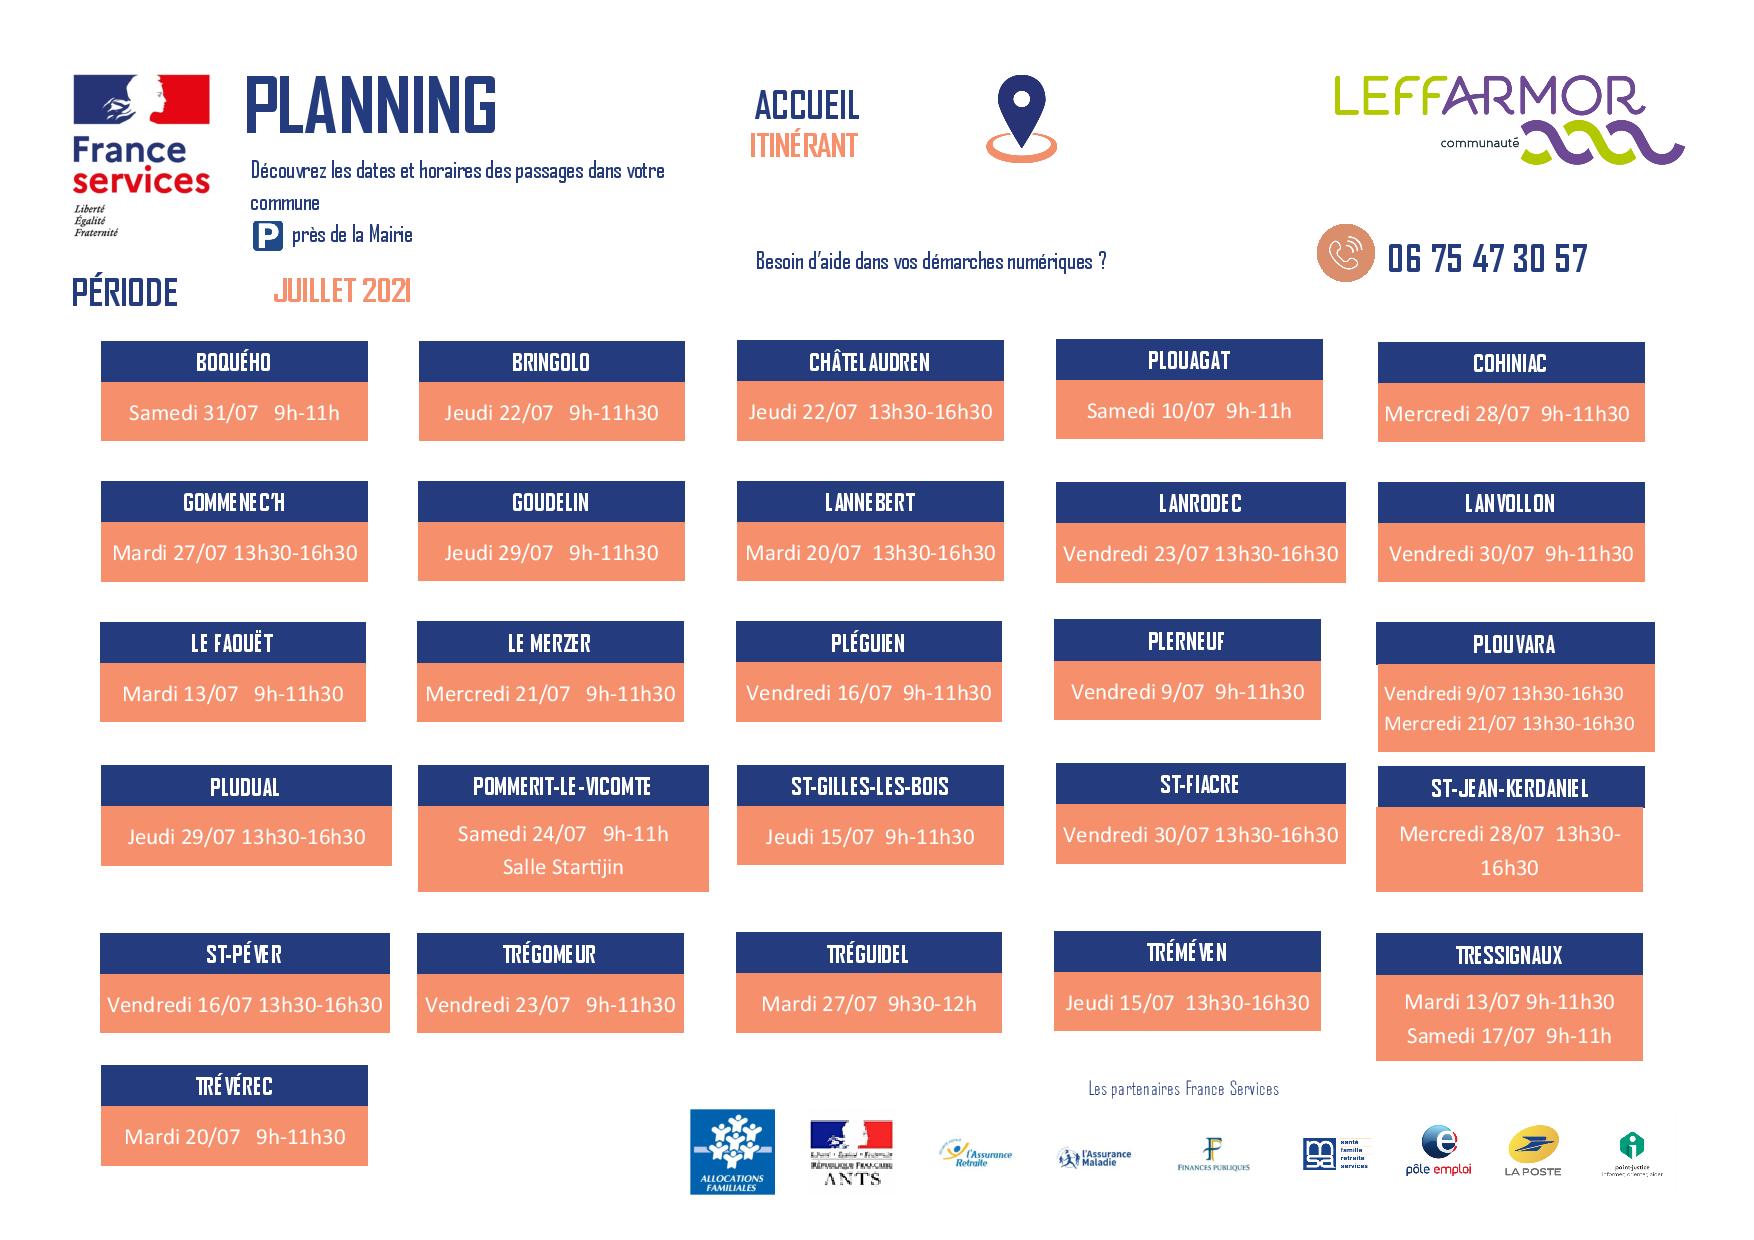 Planning France Services itinérant-page-001.jpg